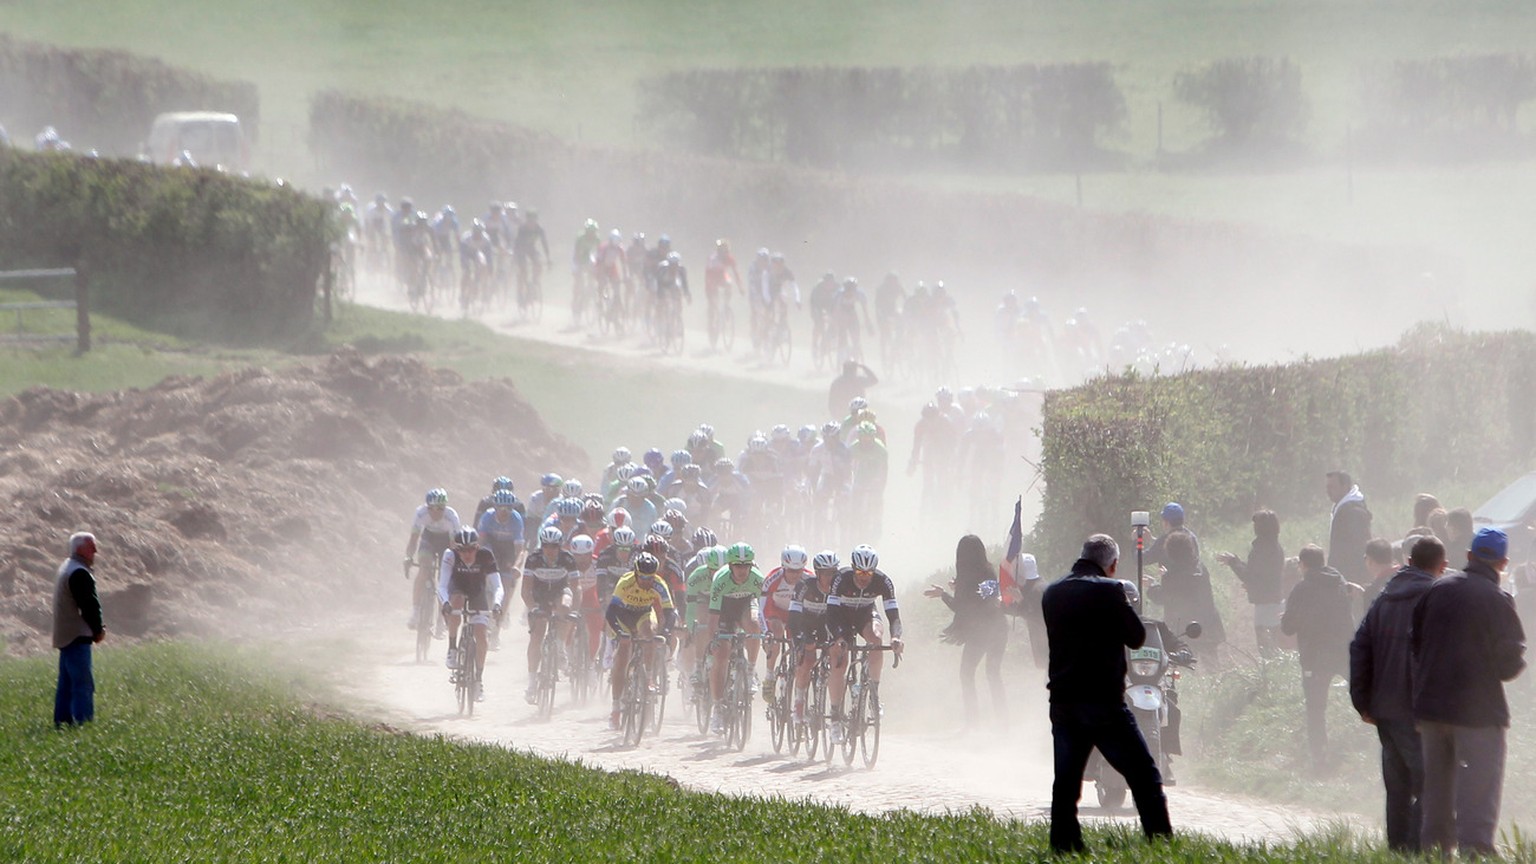 Riders steer their bikes on a cobblestone-paved section during the 112th edition of the Paris-Roubaix cycling classic, a 257 kilometer (159.69 mile) one day race, of which 51.1 kilometers (31.7 miles) ...